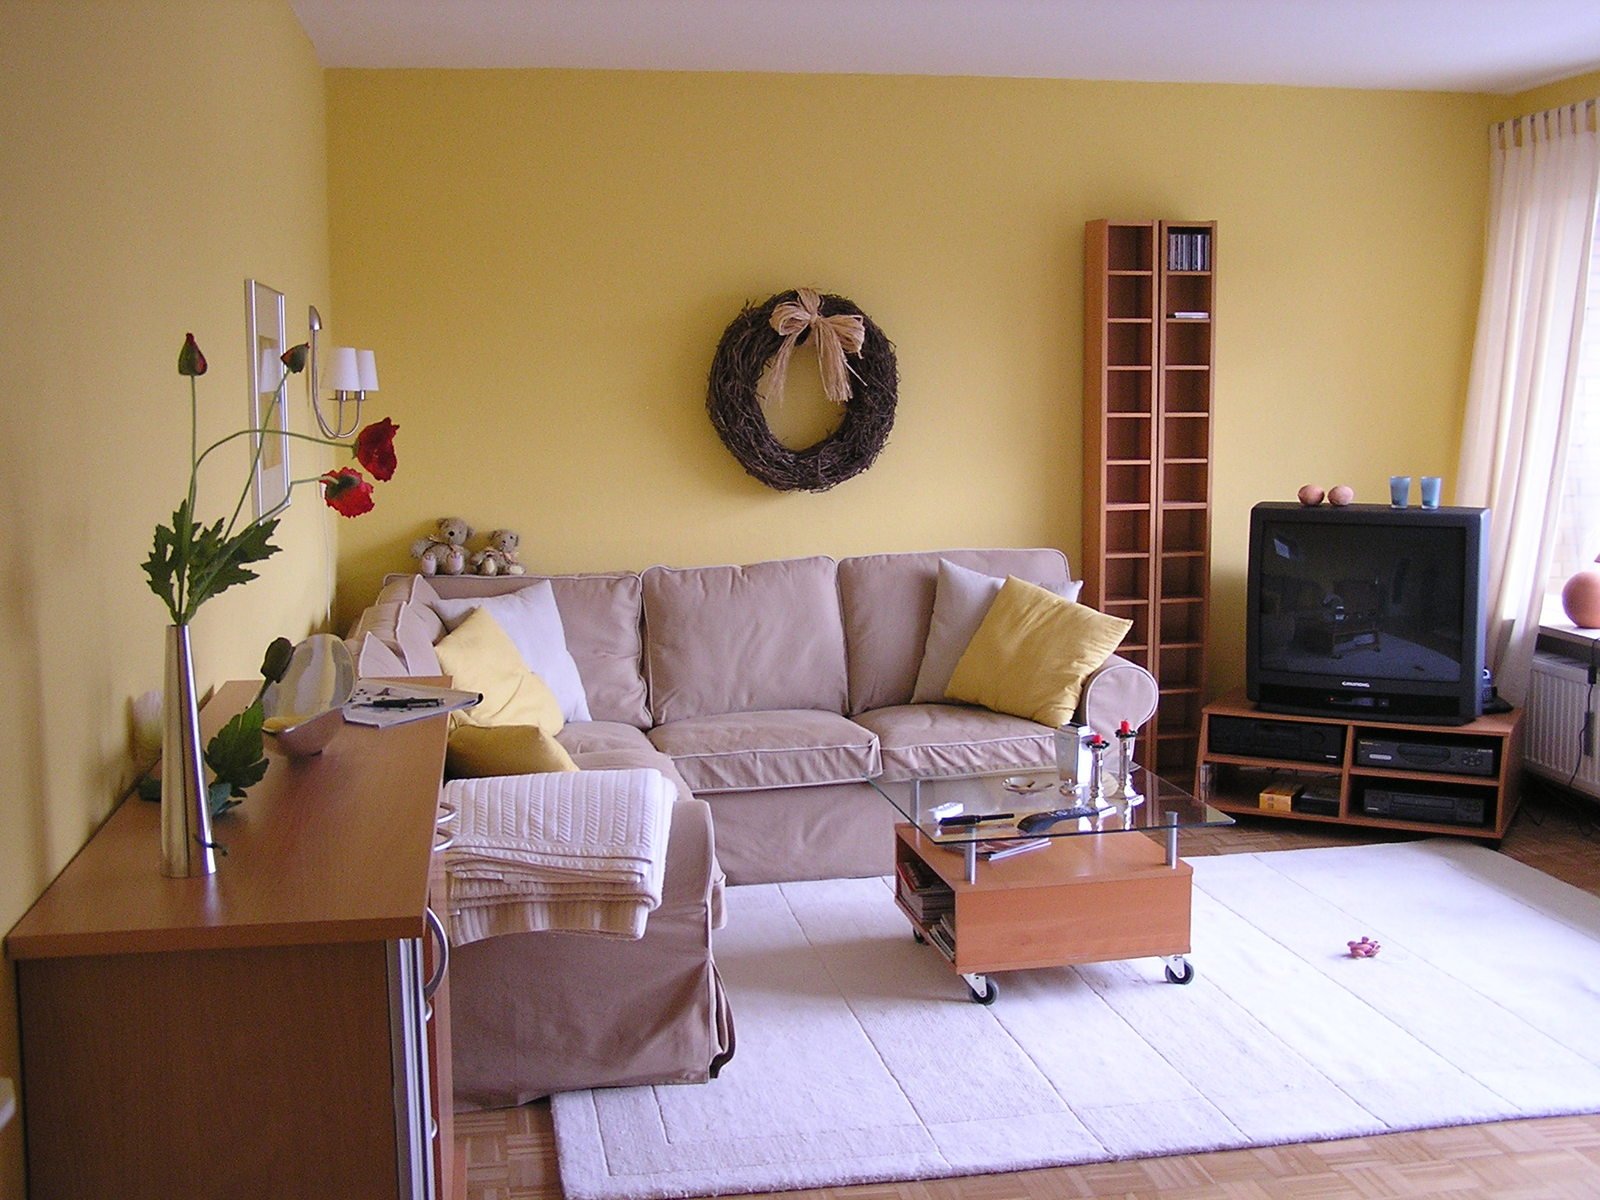 a yellow living room with white rugs and an old fashioned tv